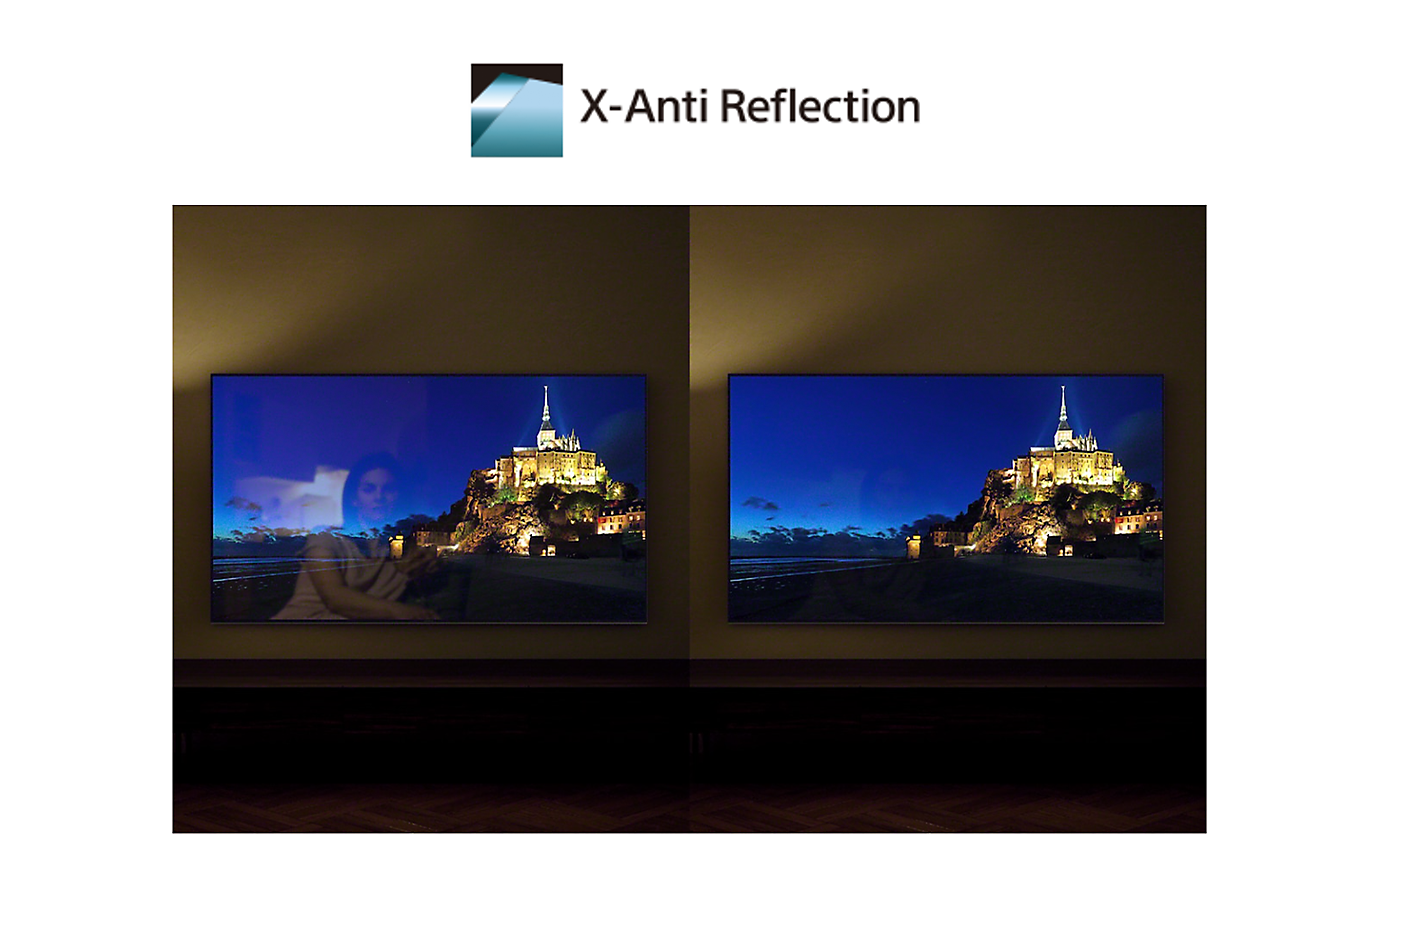 Comparison of screens with and without X-Anti Reflection